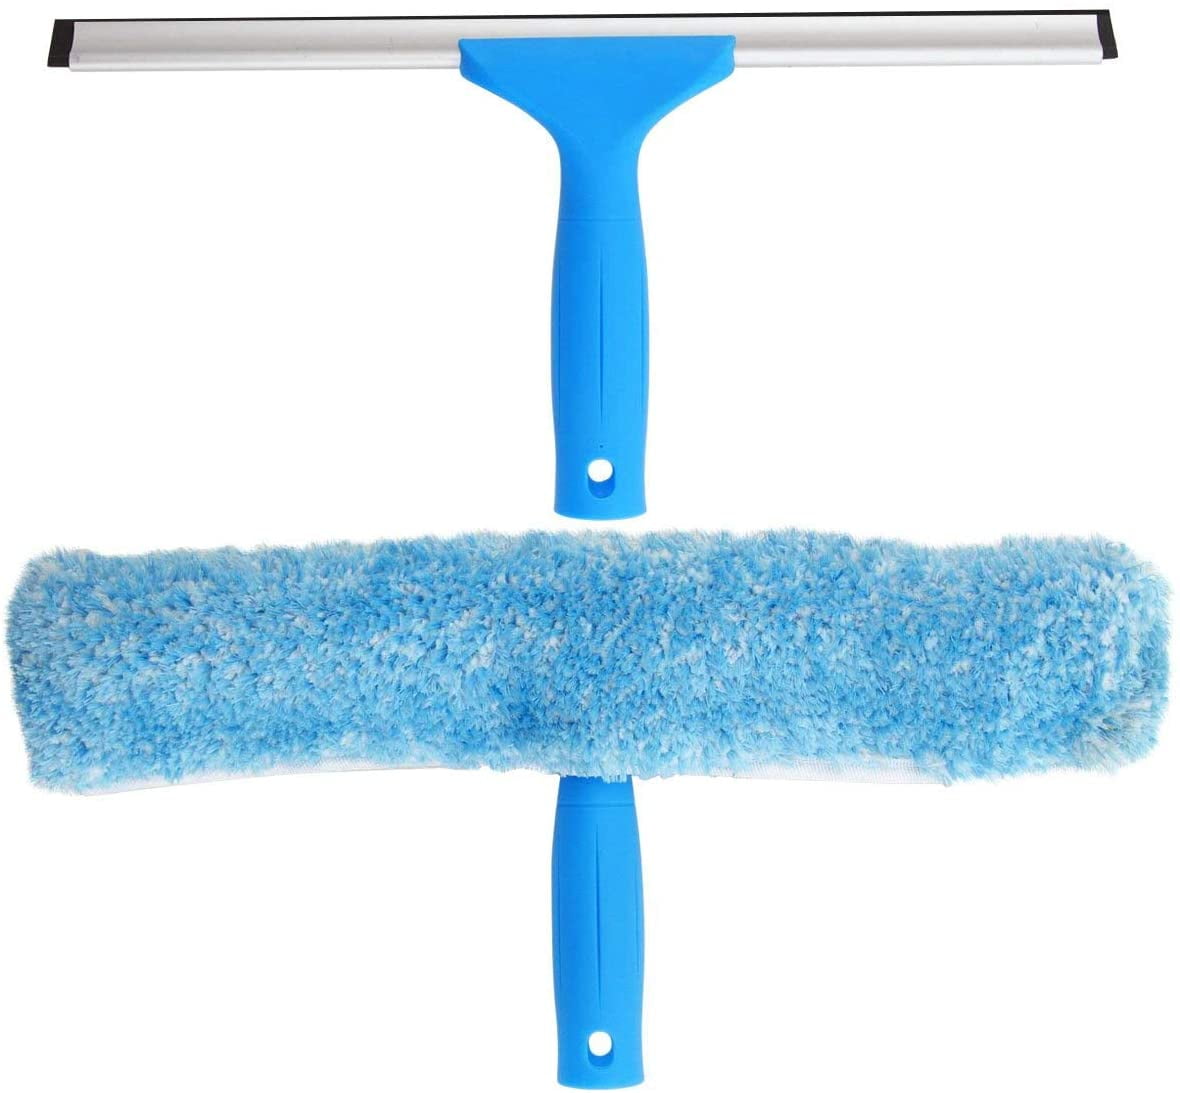 Pompotops Plastic Squeegee for Shower Doors, Windows and Auto